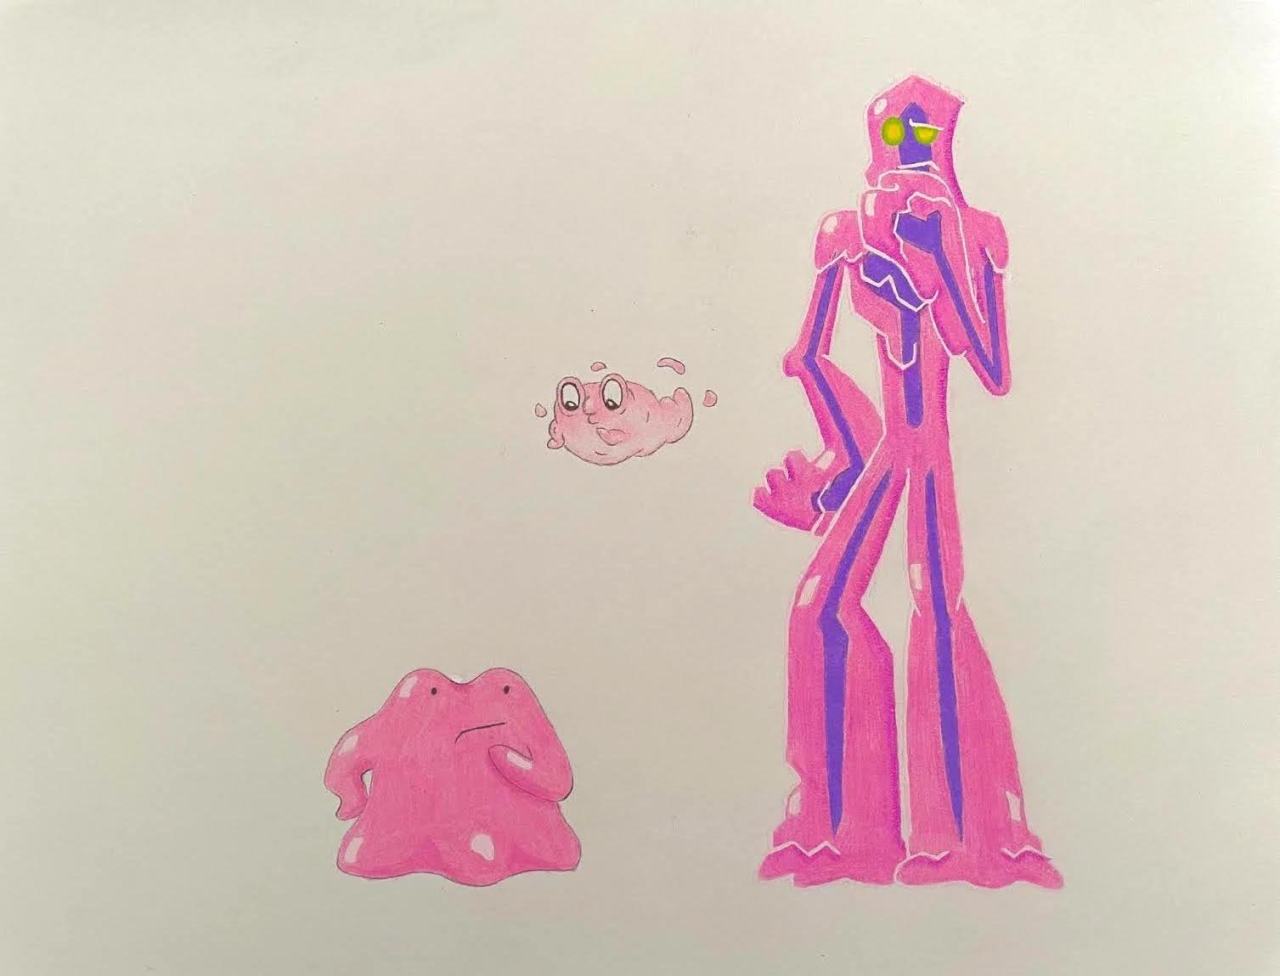 I occurred to me a while ago that a lot of shapeshifters/mimics happen to be pink and gelatinous, so I thought what if some of them met. :) I’ve drawn and colored Ditto, Morph and Globby all making “hmmm” faces and essentially copying each other, so the question remains, “Who made the face first?” Hmmm. ;) #globby#ditto#morph #big hero 6  #big hero six the series  #bh6 the series #bh6#pokemon#treasure planet#shapeshifter#similarities#funny#disney#disney channel#hand drawn#gelatinous#hmmm#copying